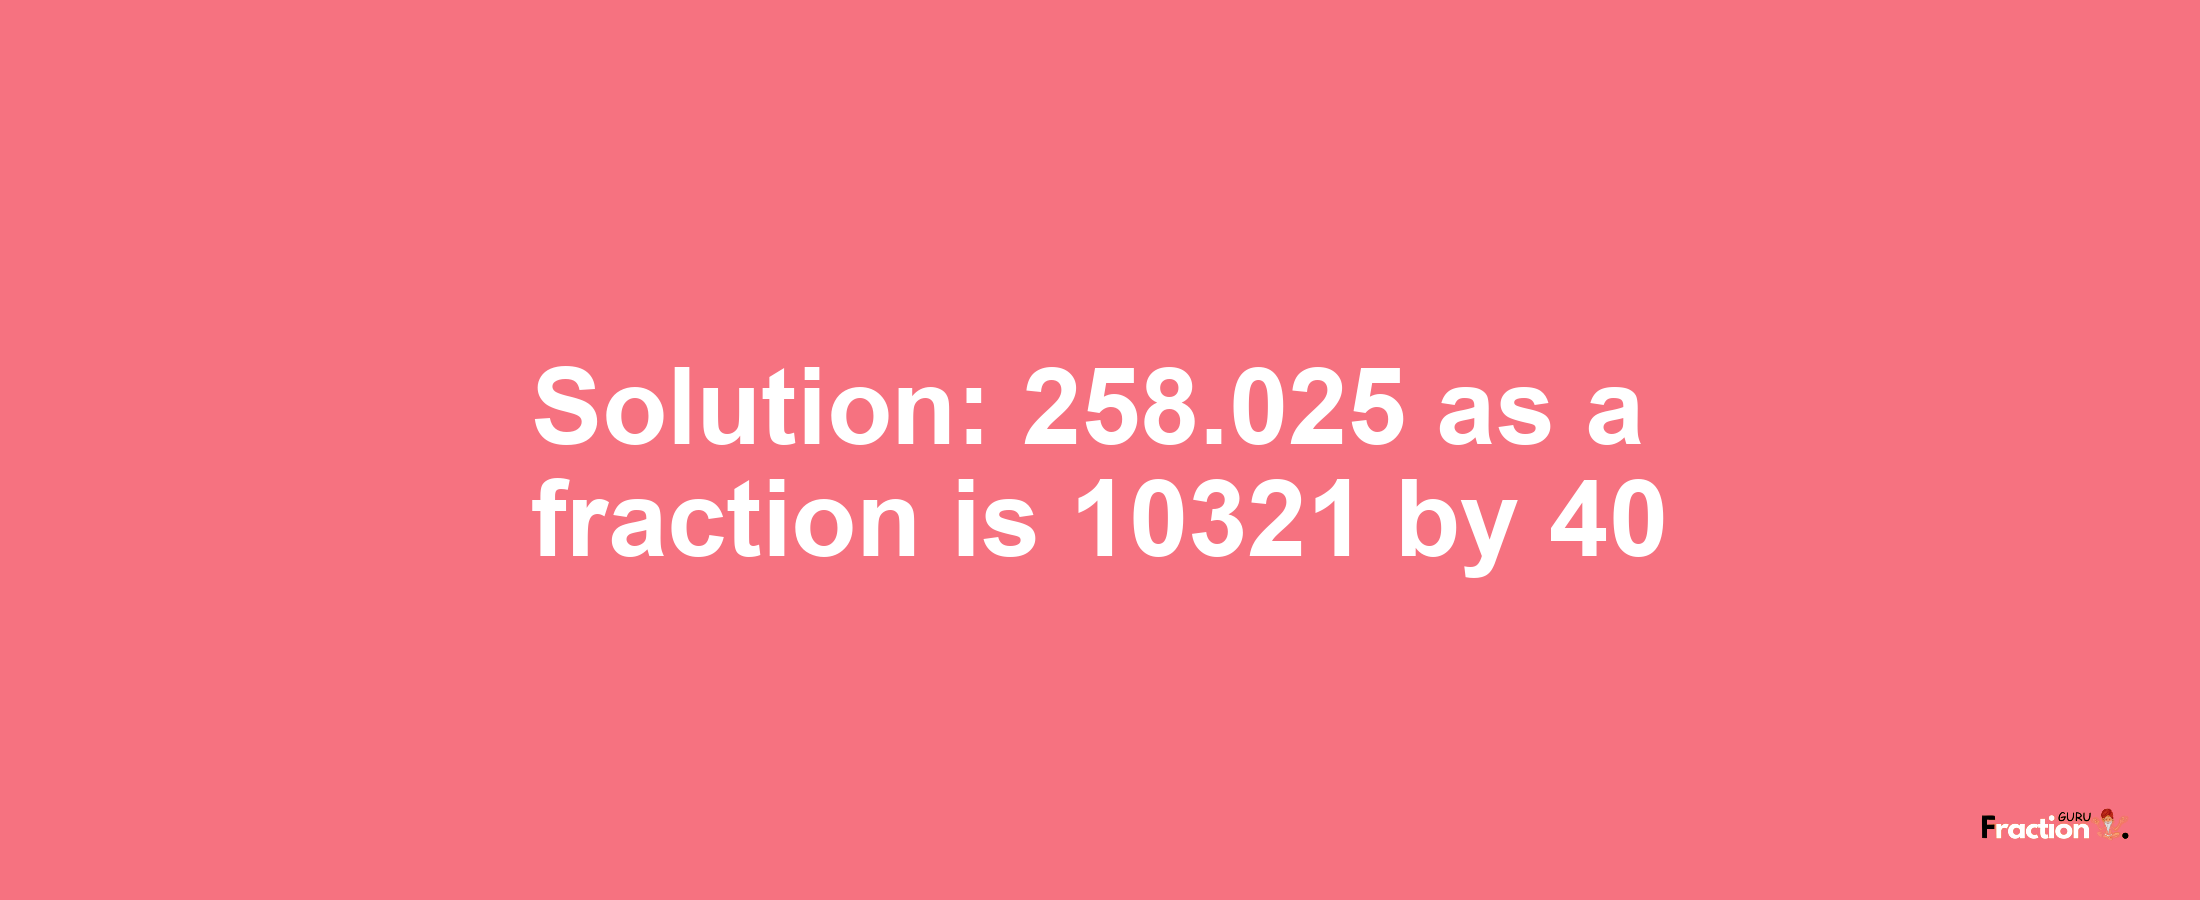 Solution:258.025 as a fraction is 10321/40